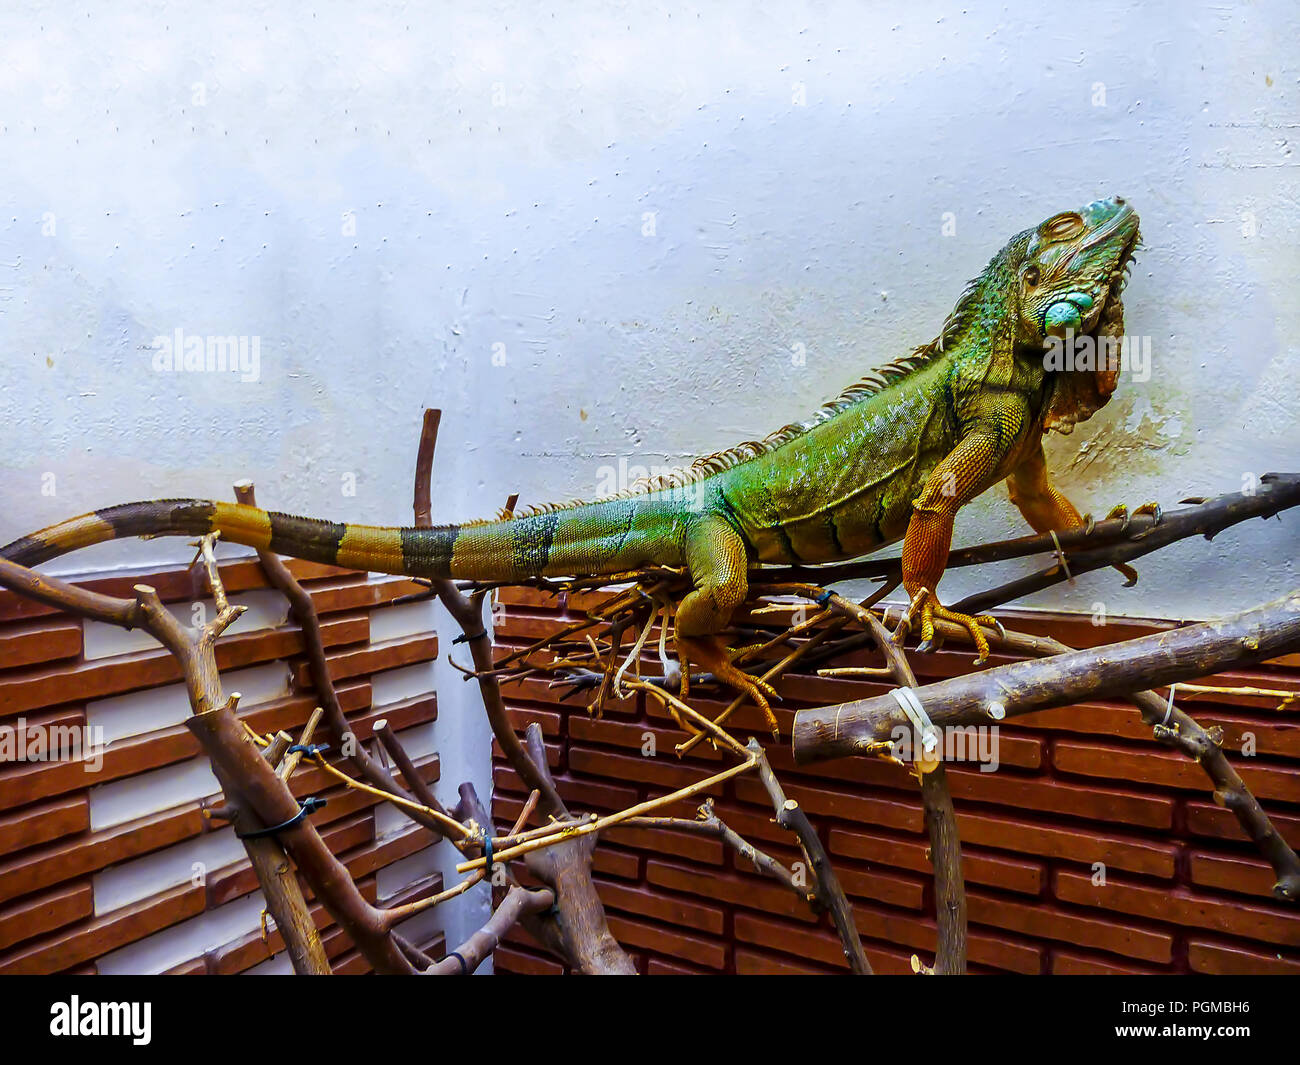 Iguana Lizard. Domestic pet relaxing with eyes closed. Stock Image. Stock Photo